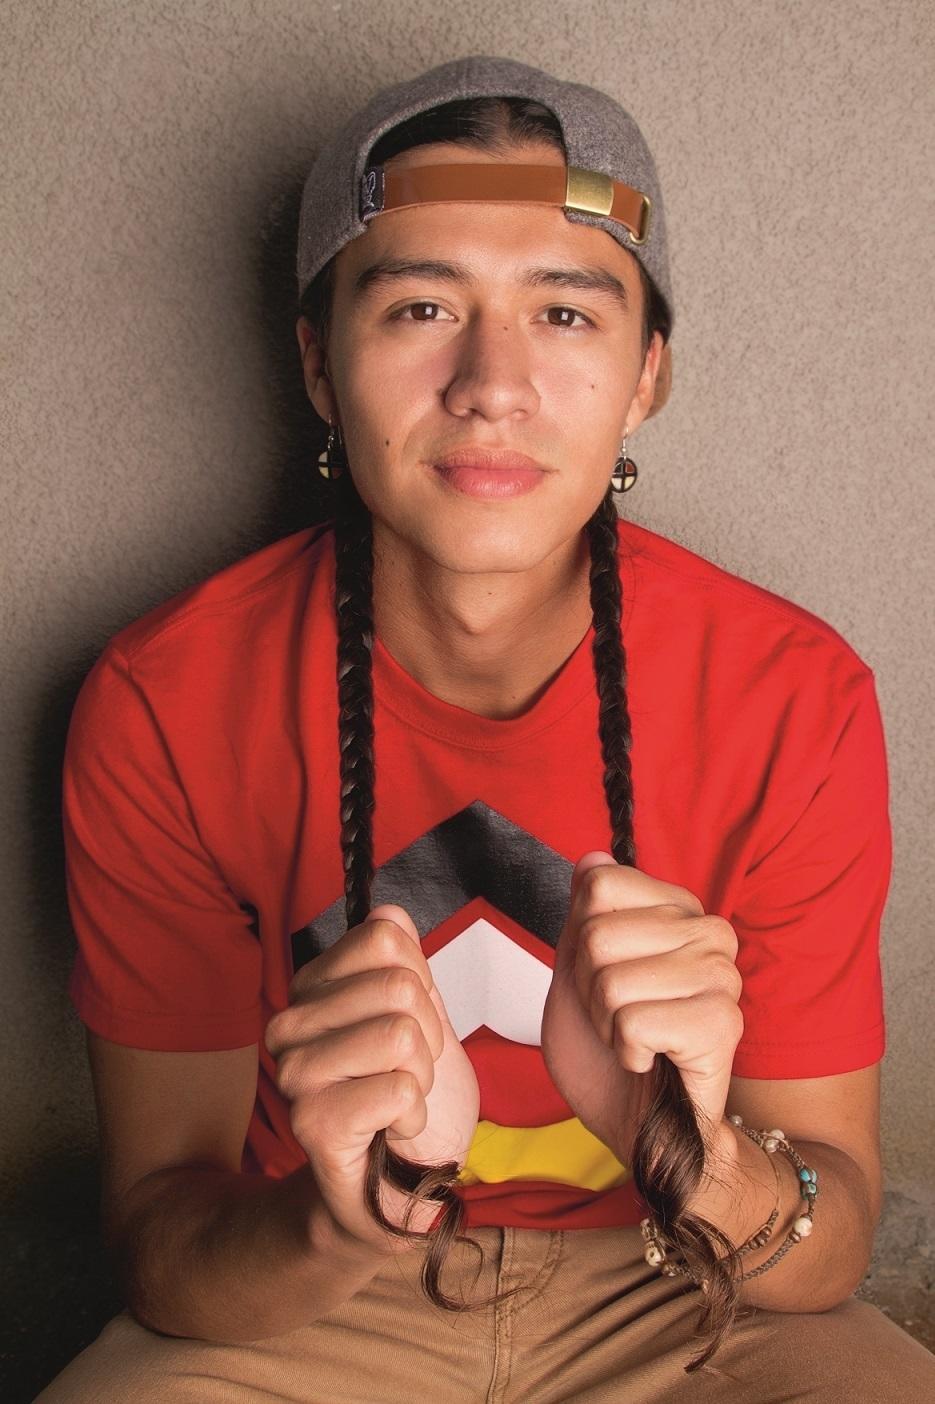 Rapper Frank Waln (Sicangu Lakota) told Wilbur that personal sovereignty extends to his own body: 